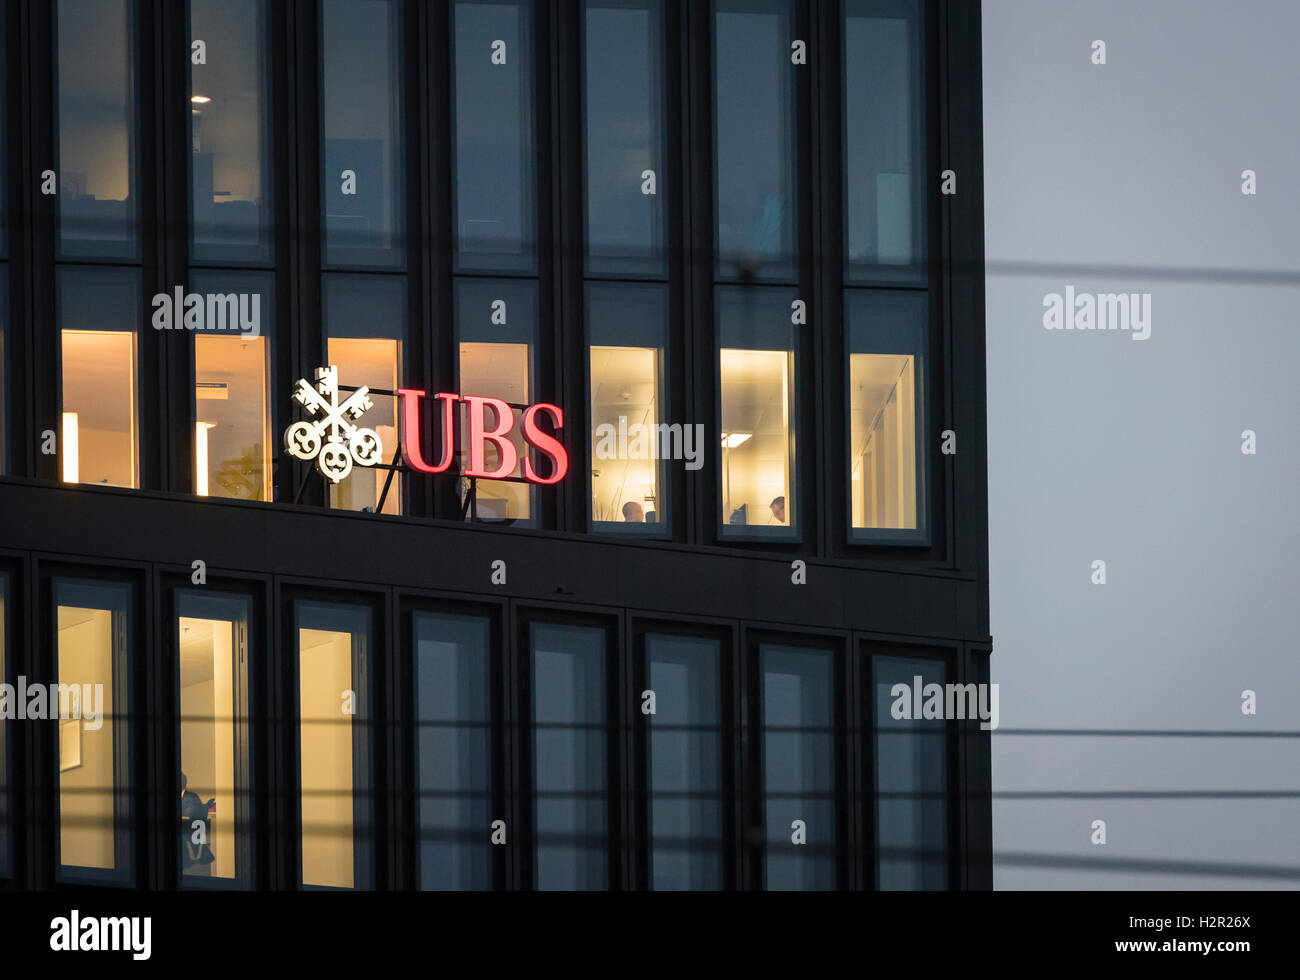 Early in the morning, the lights are switched on in some offices of a UBS bank office building at Zurich, Switzerland. Stock Photo